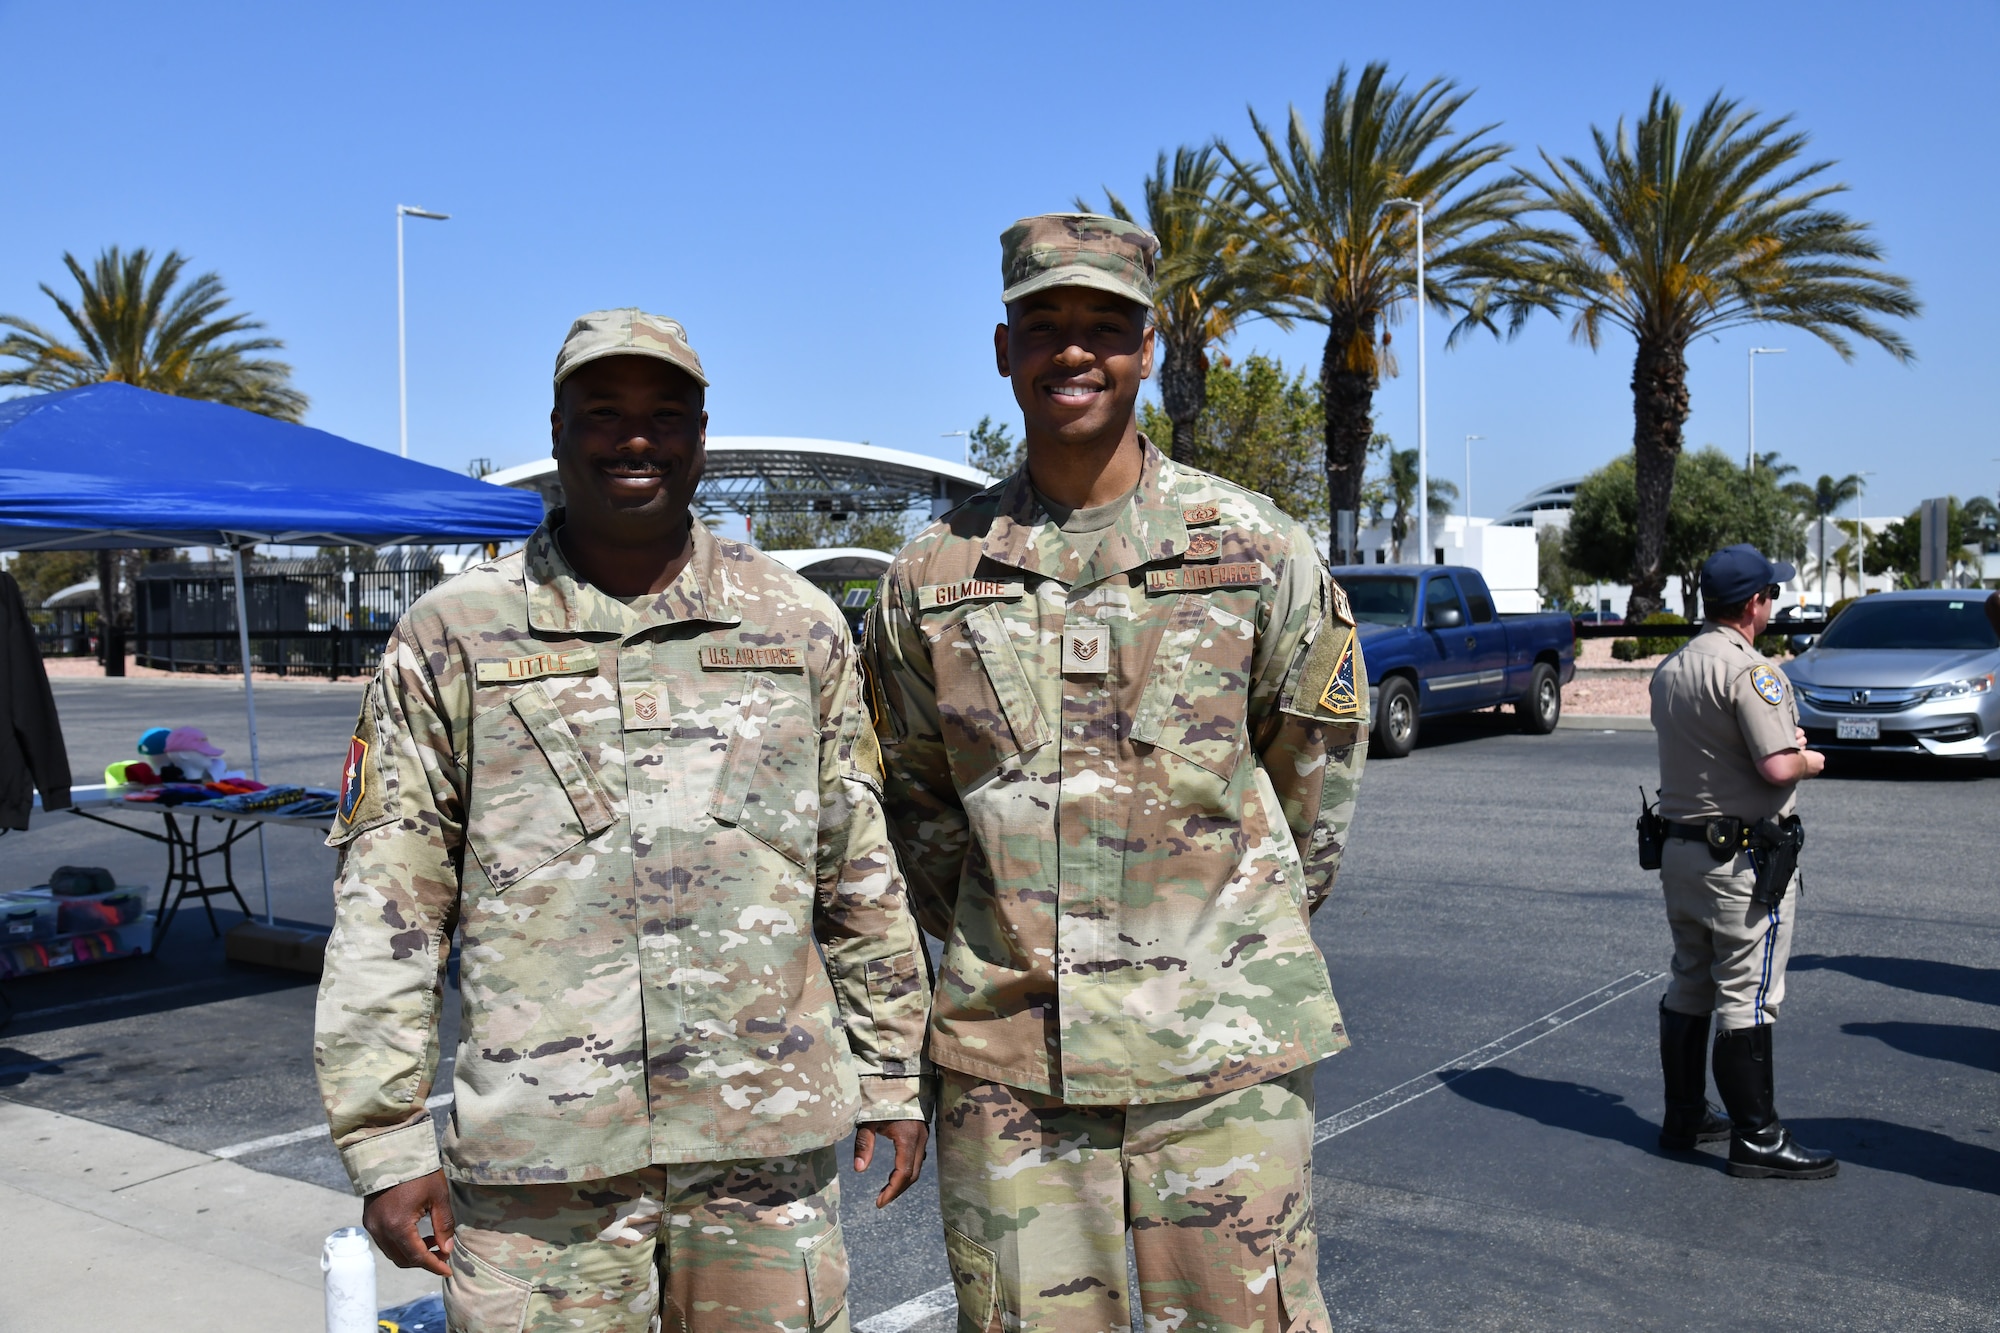 Master Sgt. Anthony Little and Tech. Sgt. Amari Gilmore, from the Space Base Delta 3 Safety Office stand together for a photo opportunity in front of the Commissary during Motorcycle Safety and Awareness Day.